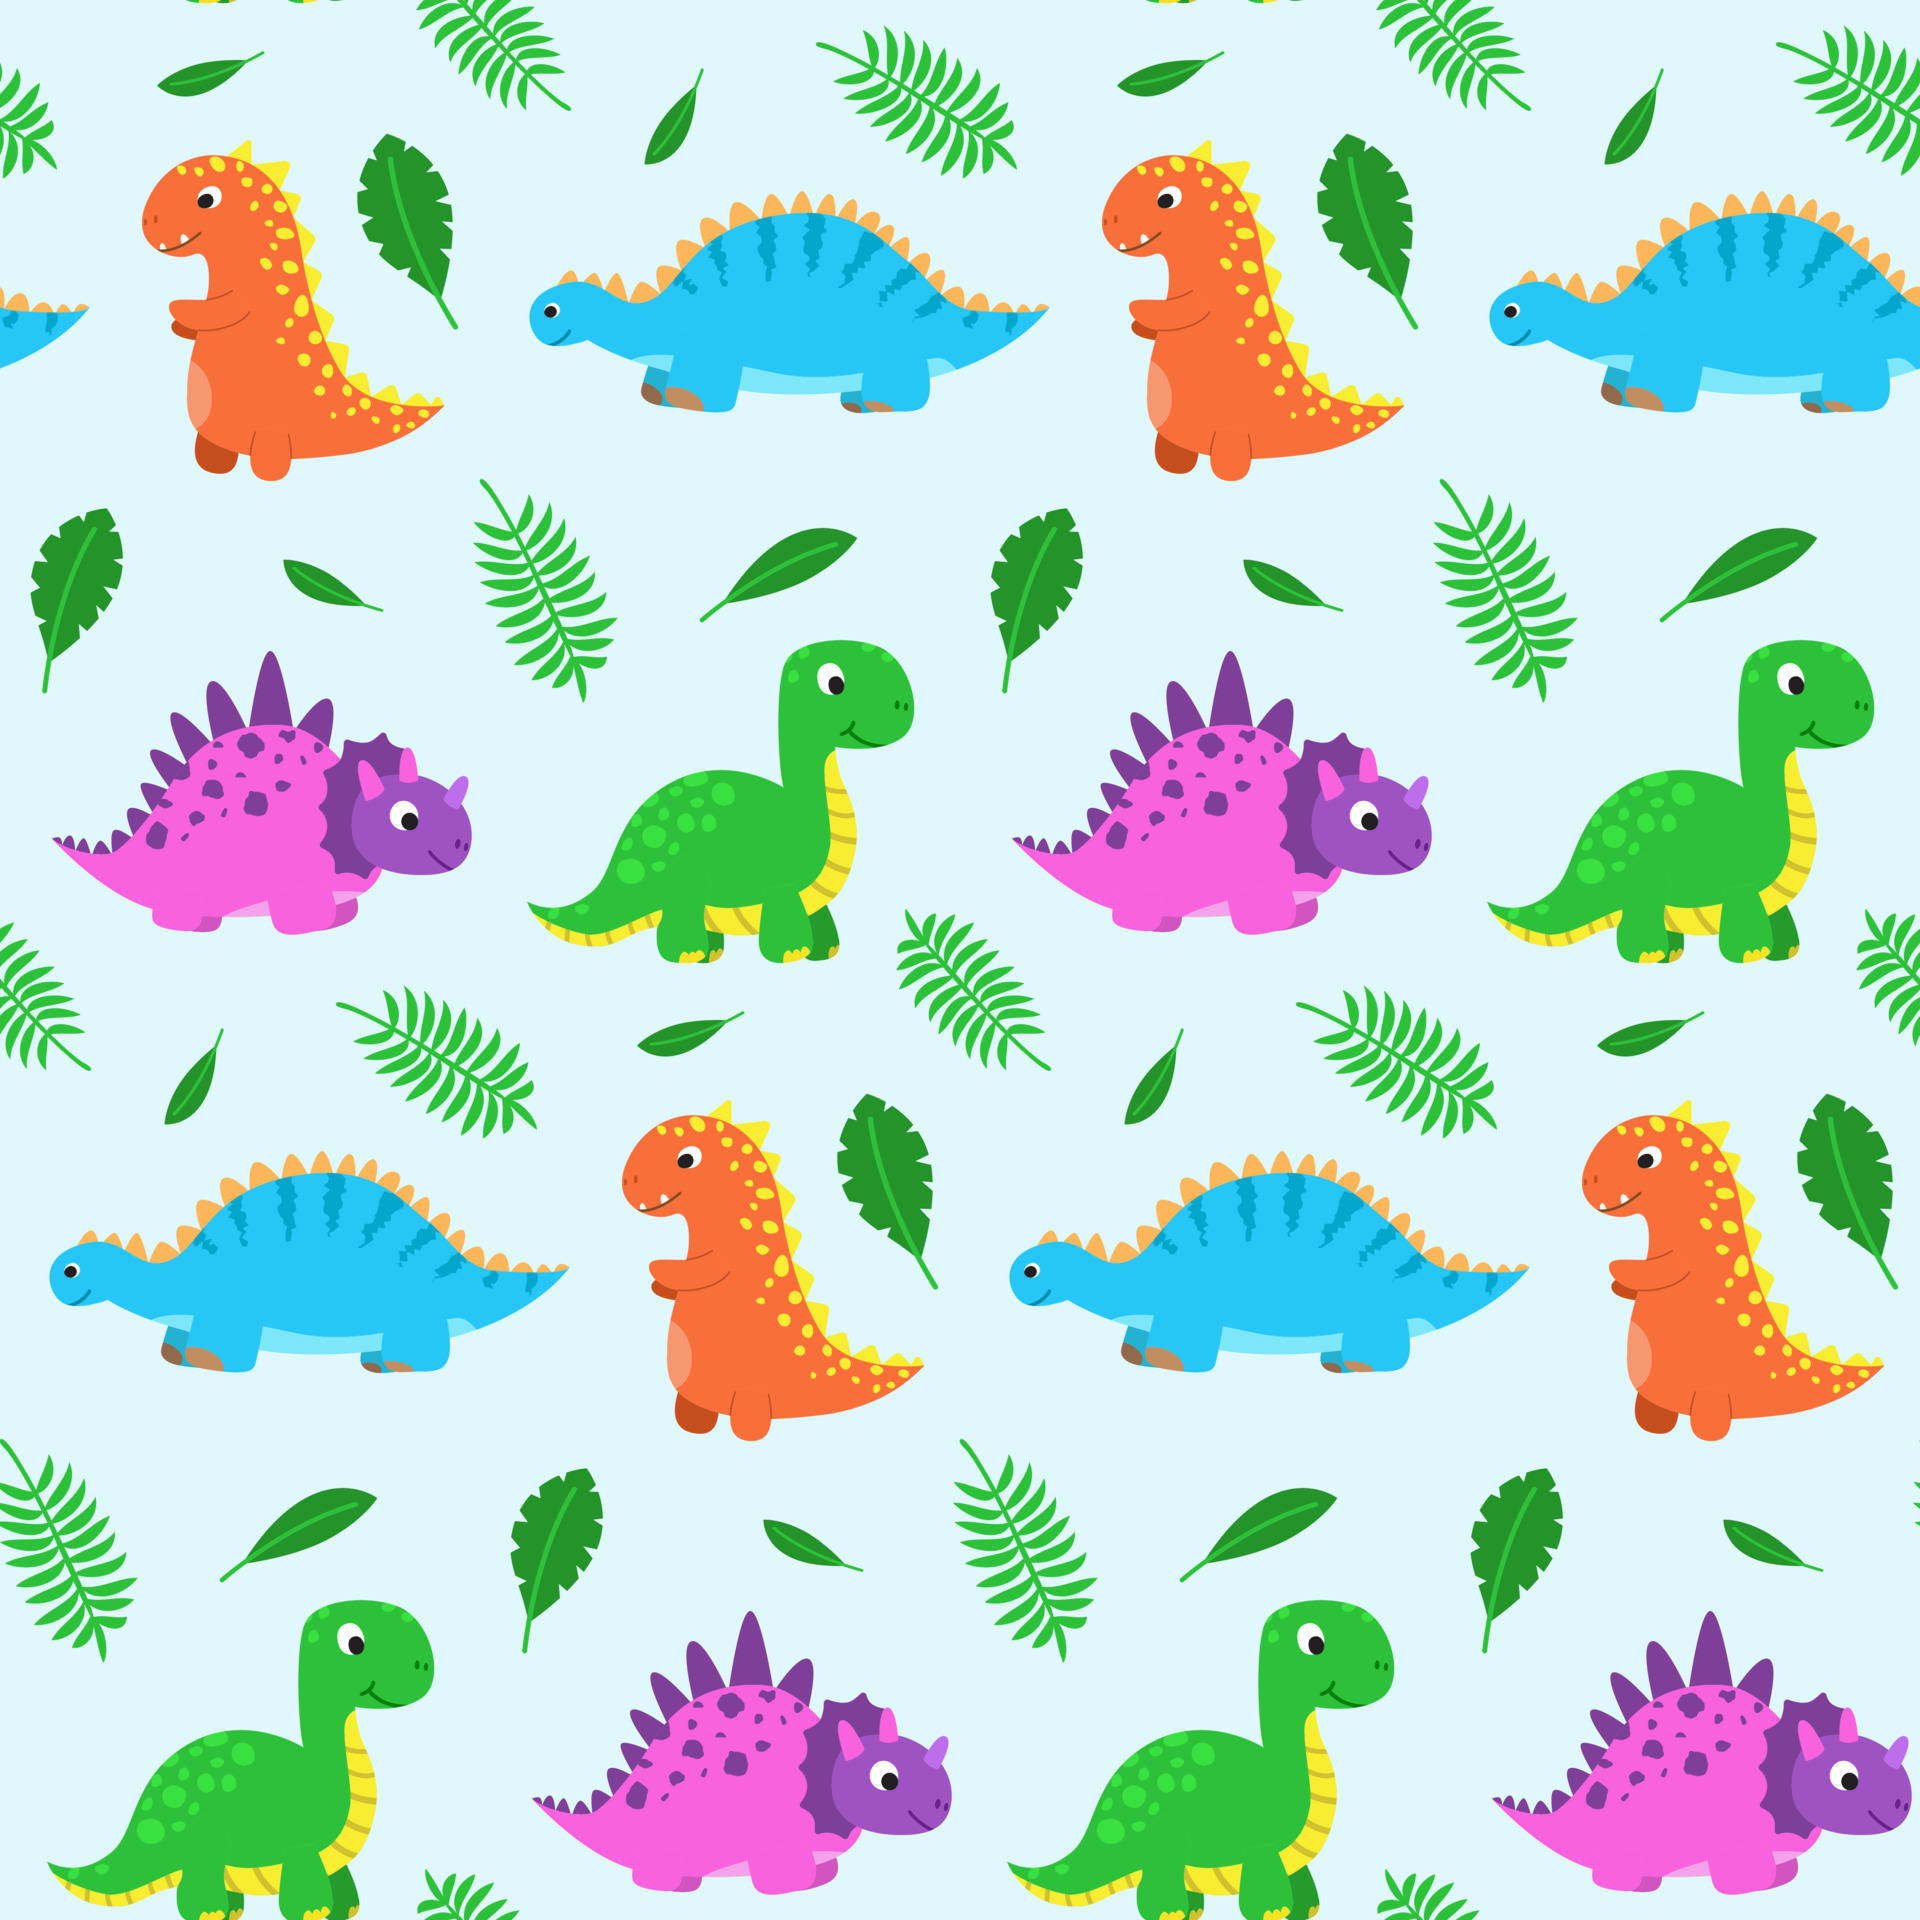 A Colorful Dinosaur Pattern With Leaves And Leaves Wallpaper